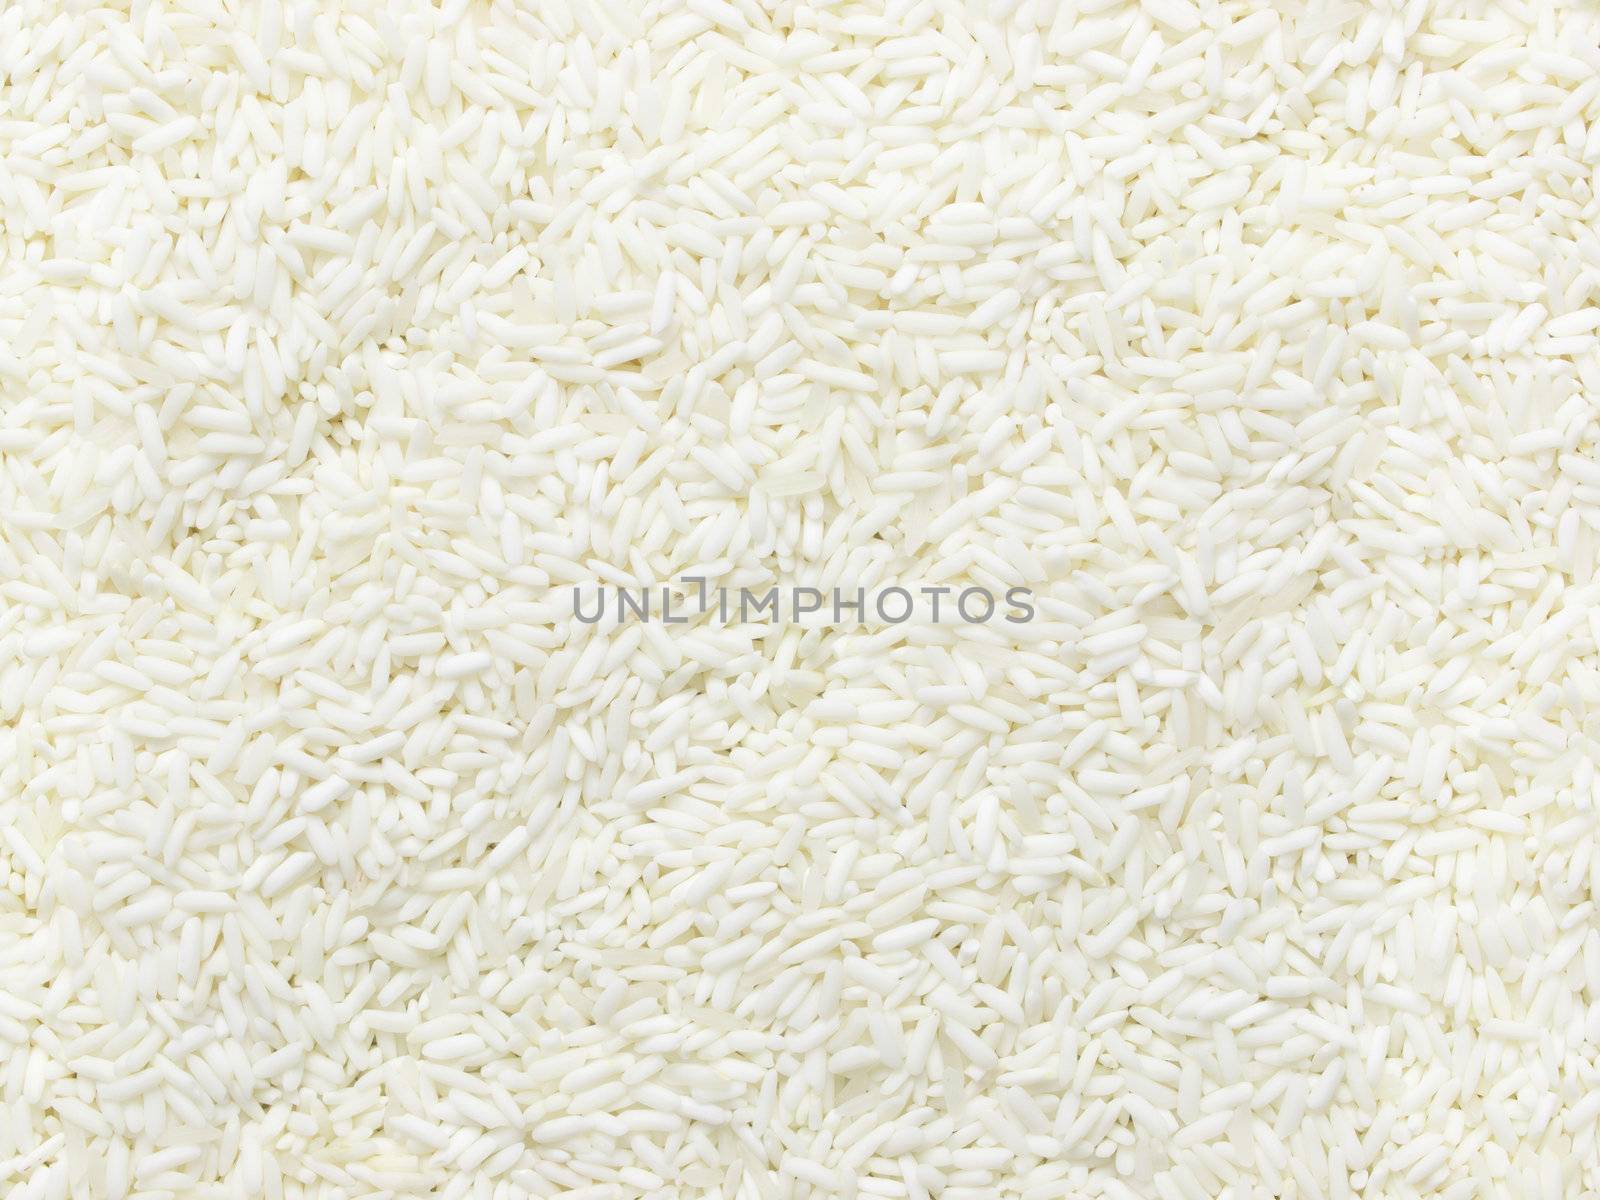 raw white glutinous rice by zkruger